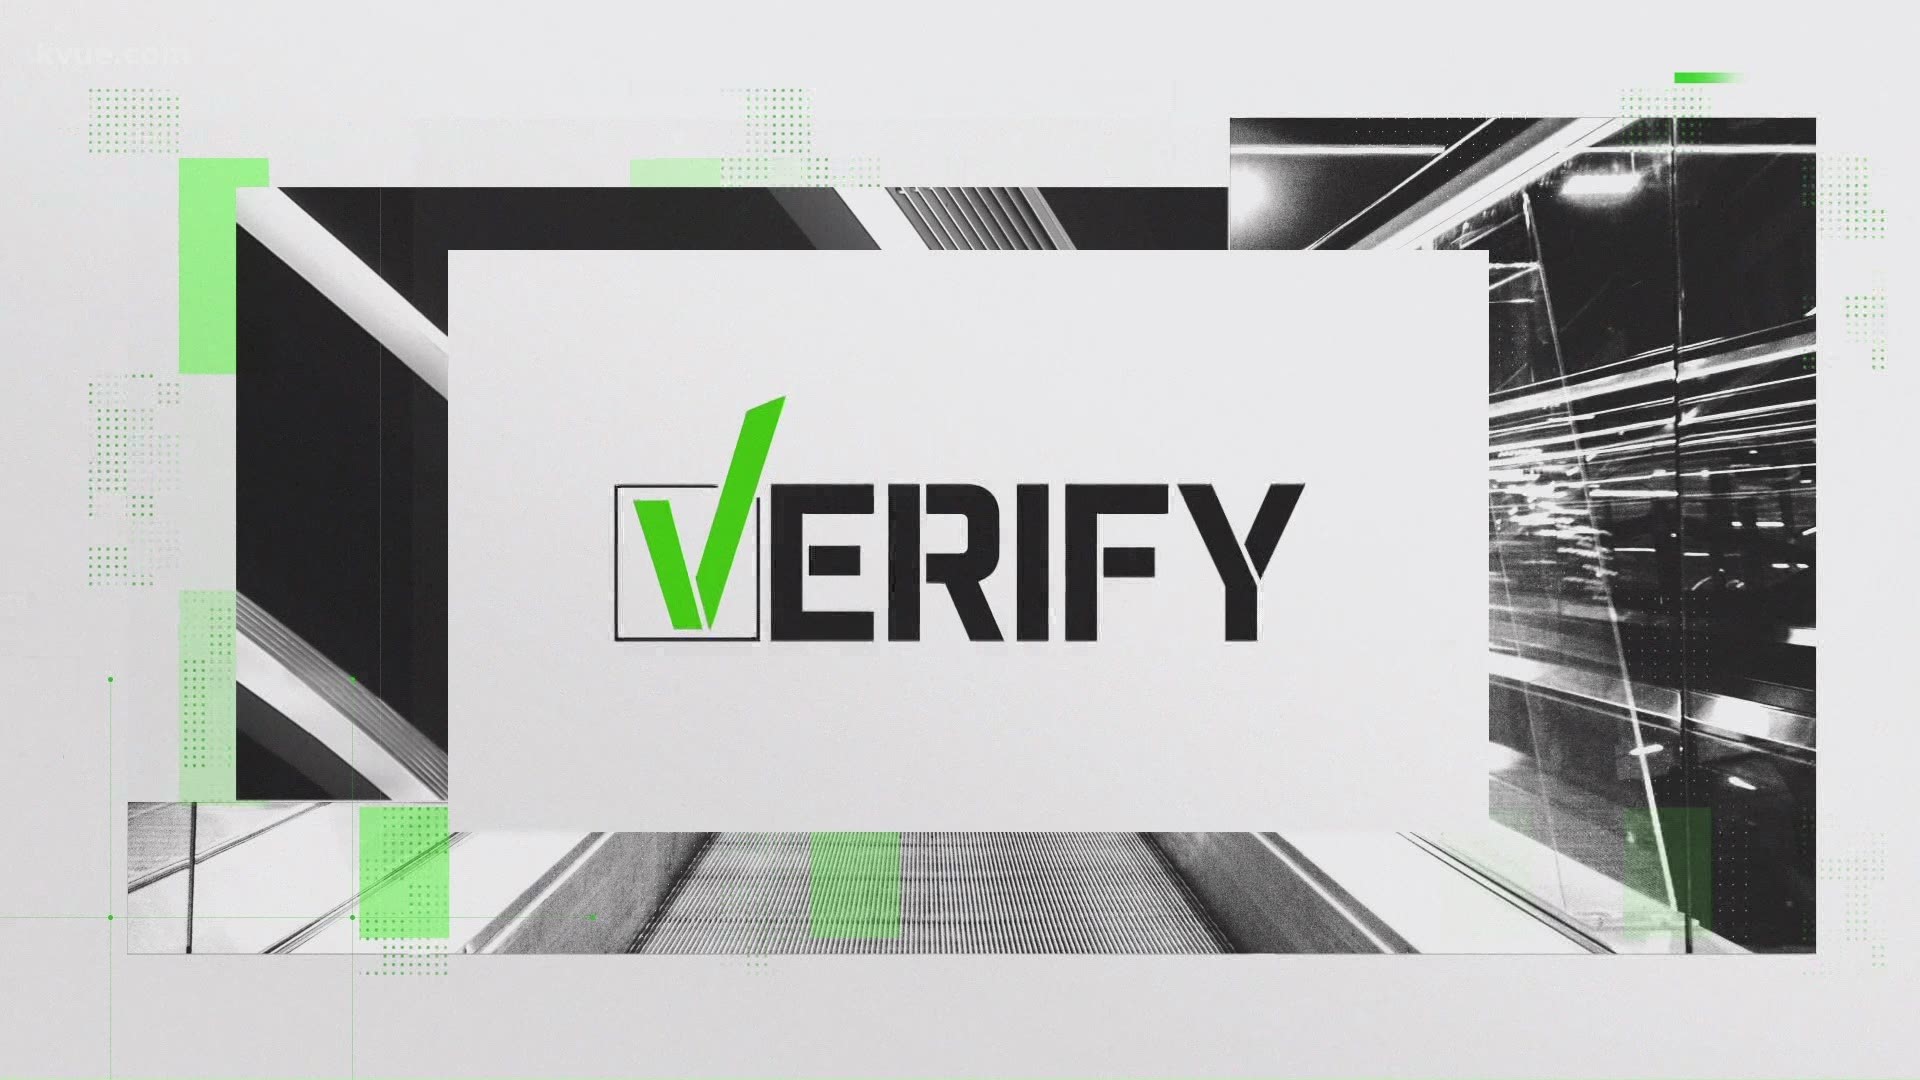 We heard a lot of numbers from Gov. Greg Abbott when he said Texas businesses may reopen 100%. Our VERIFY team worked to get those confirmed – and in context.